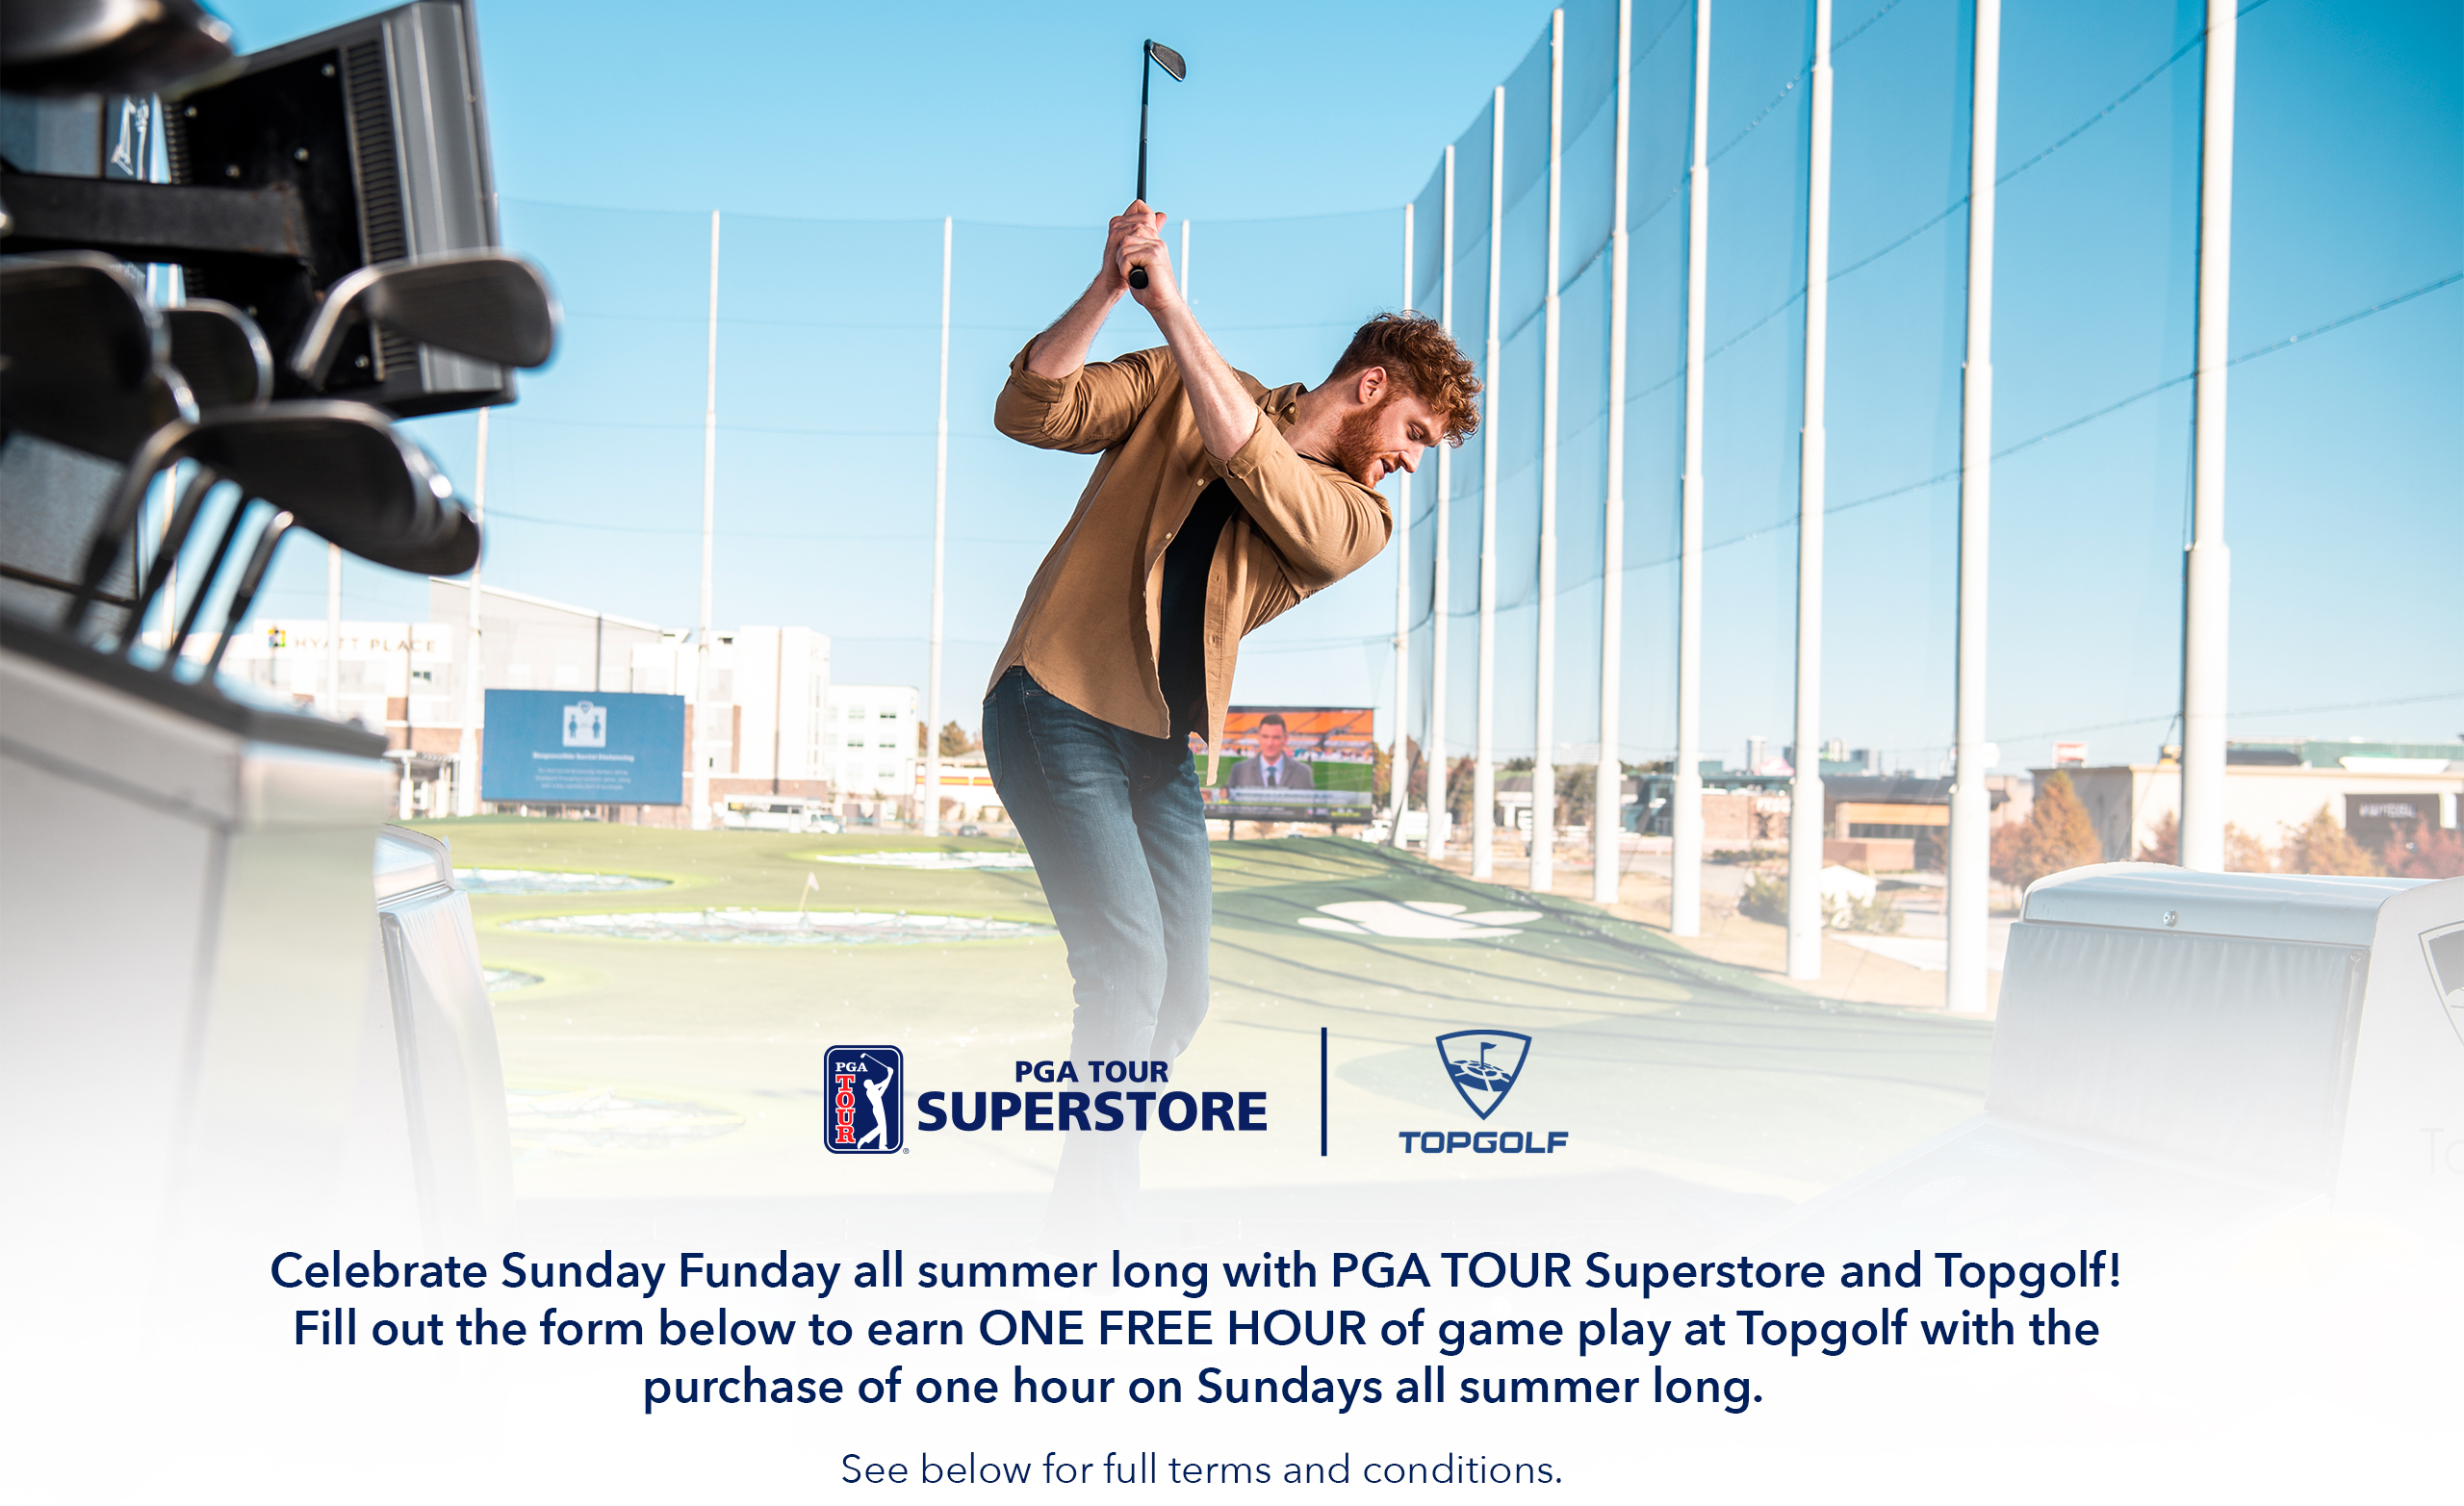 Celebrate Sunday Funday all Summer long with PGA TOUR Superstore and Topgolf! Fill out the form below to earn ONE FREE HOUR of game play at Topgolf with the purchase of one hour on Sundays all summer long. See below for full terms and conditions.